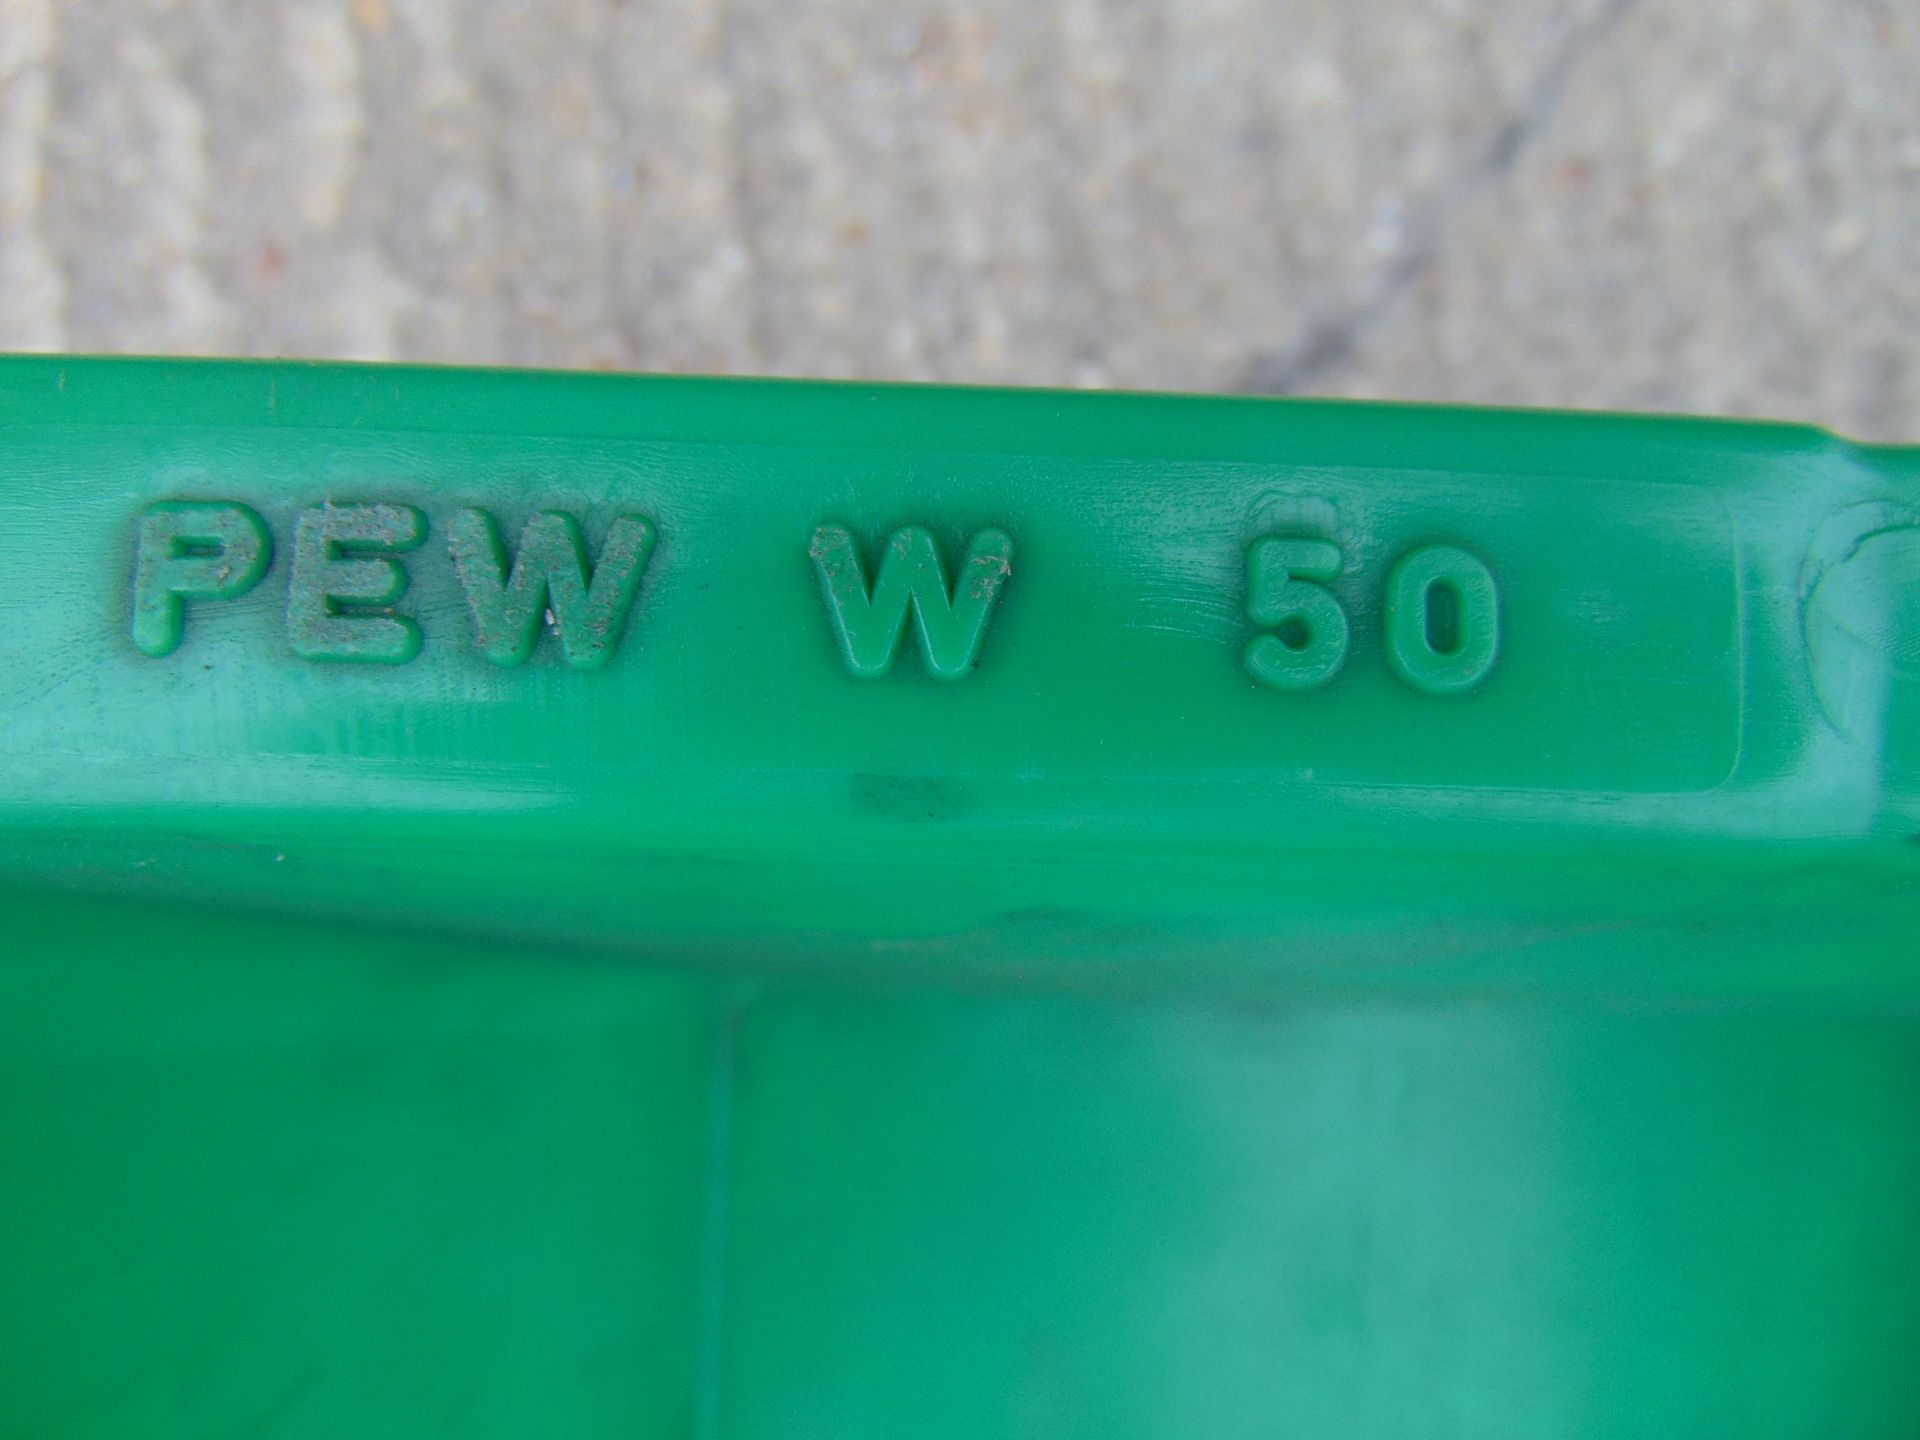 5 x Schafer Pew W50 Parts Storage Containers - Image 6 of 6